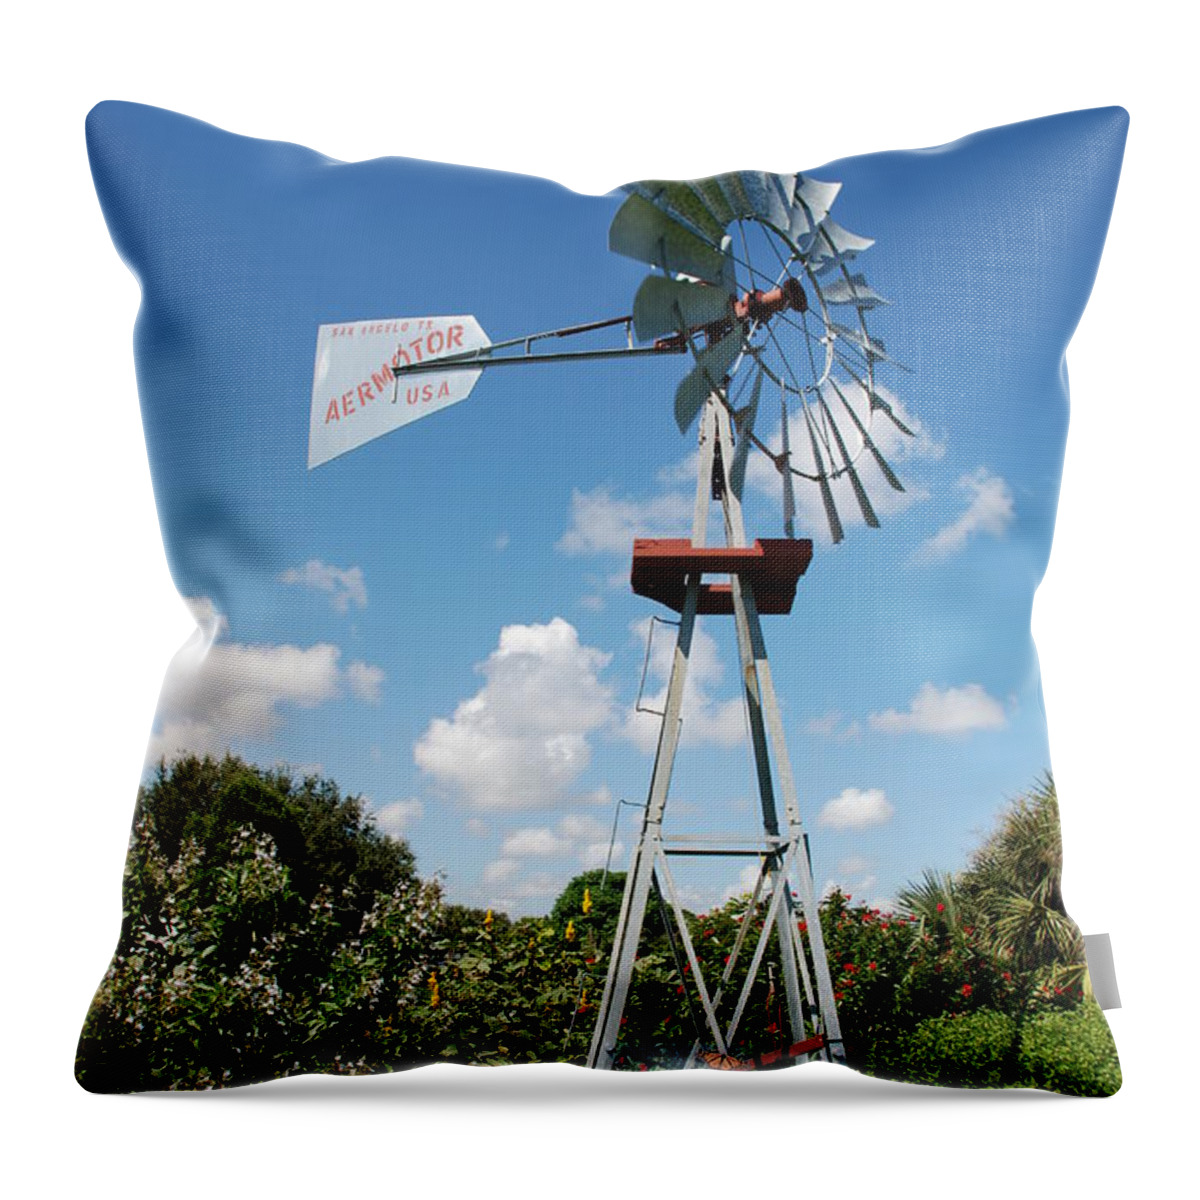 Blue Throw Pillow featuring the photograph Aeromotor Windmill by Rob Hans